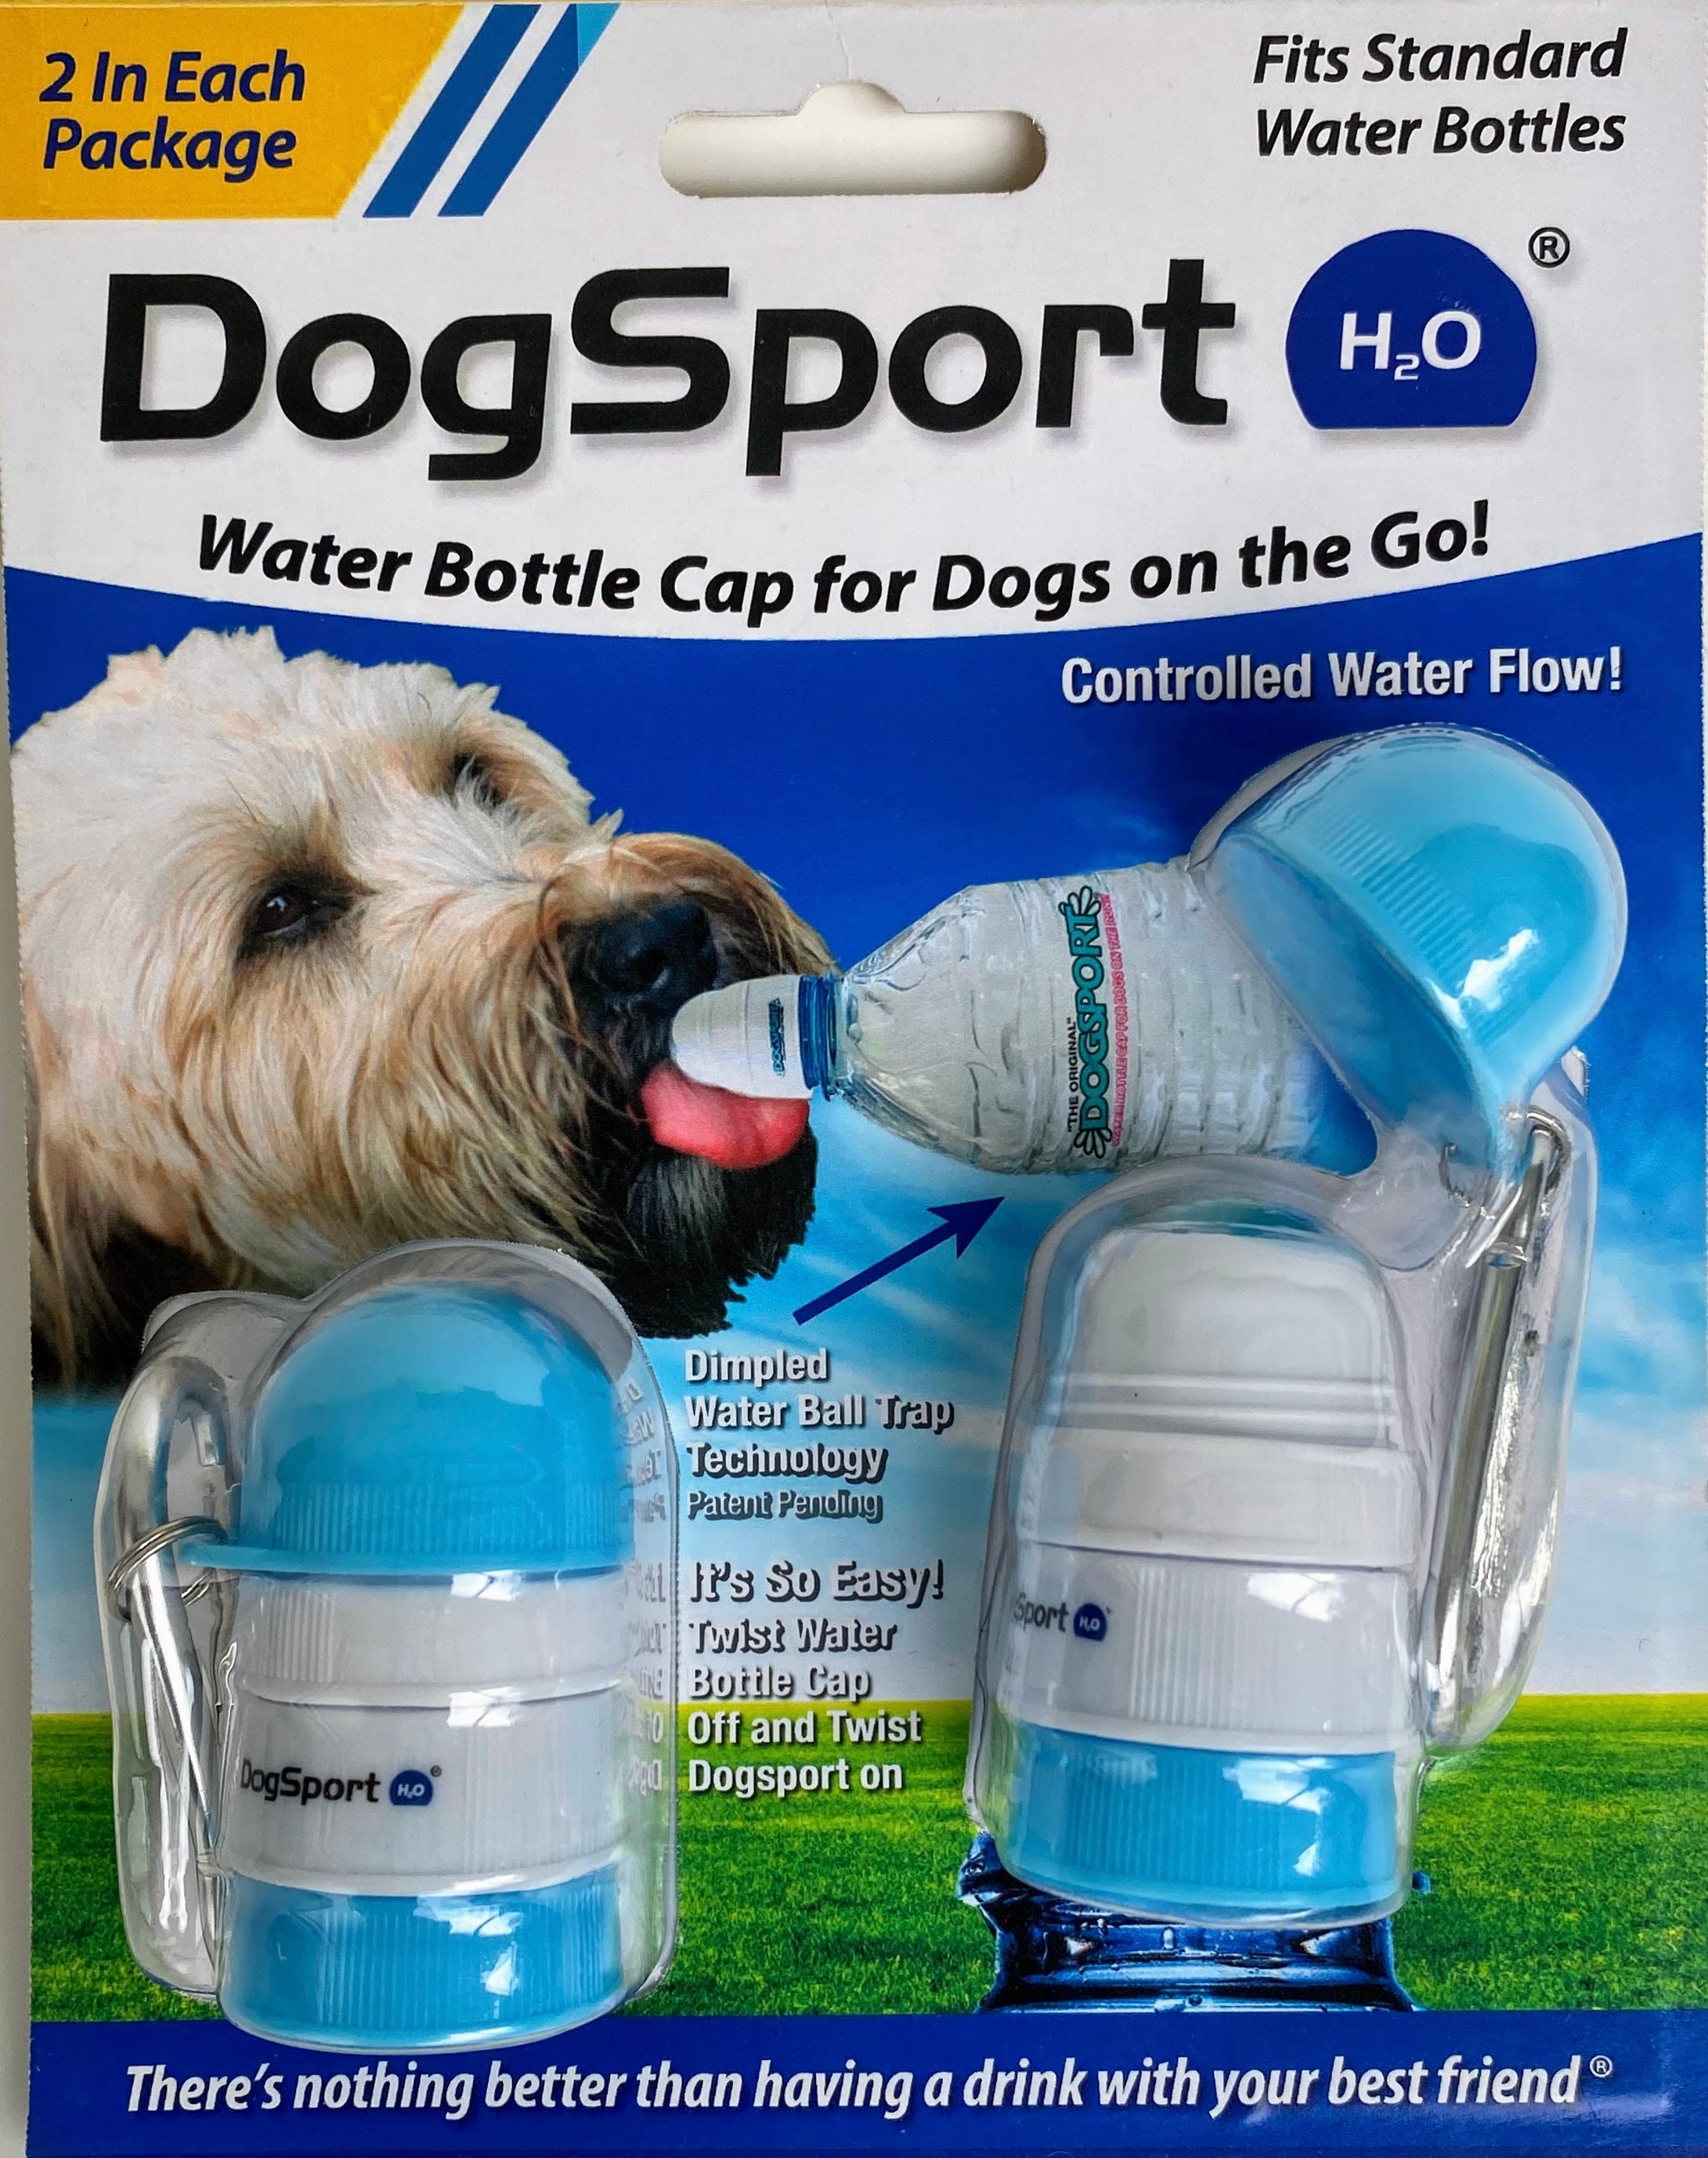 DogSport - Water bottle Cap for Dogs on the Go – DogSportH2O